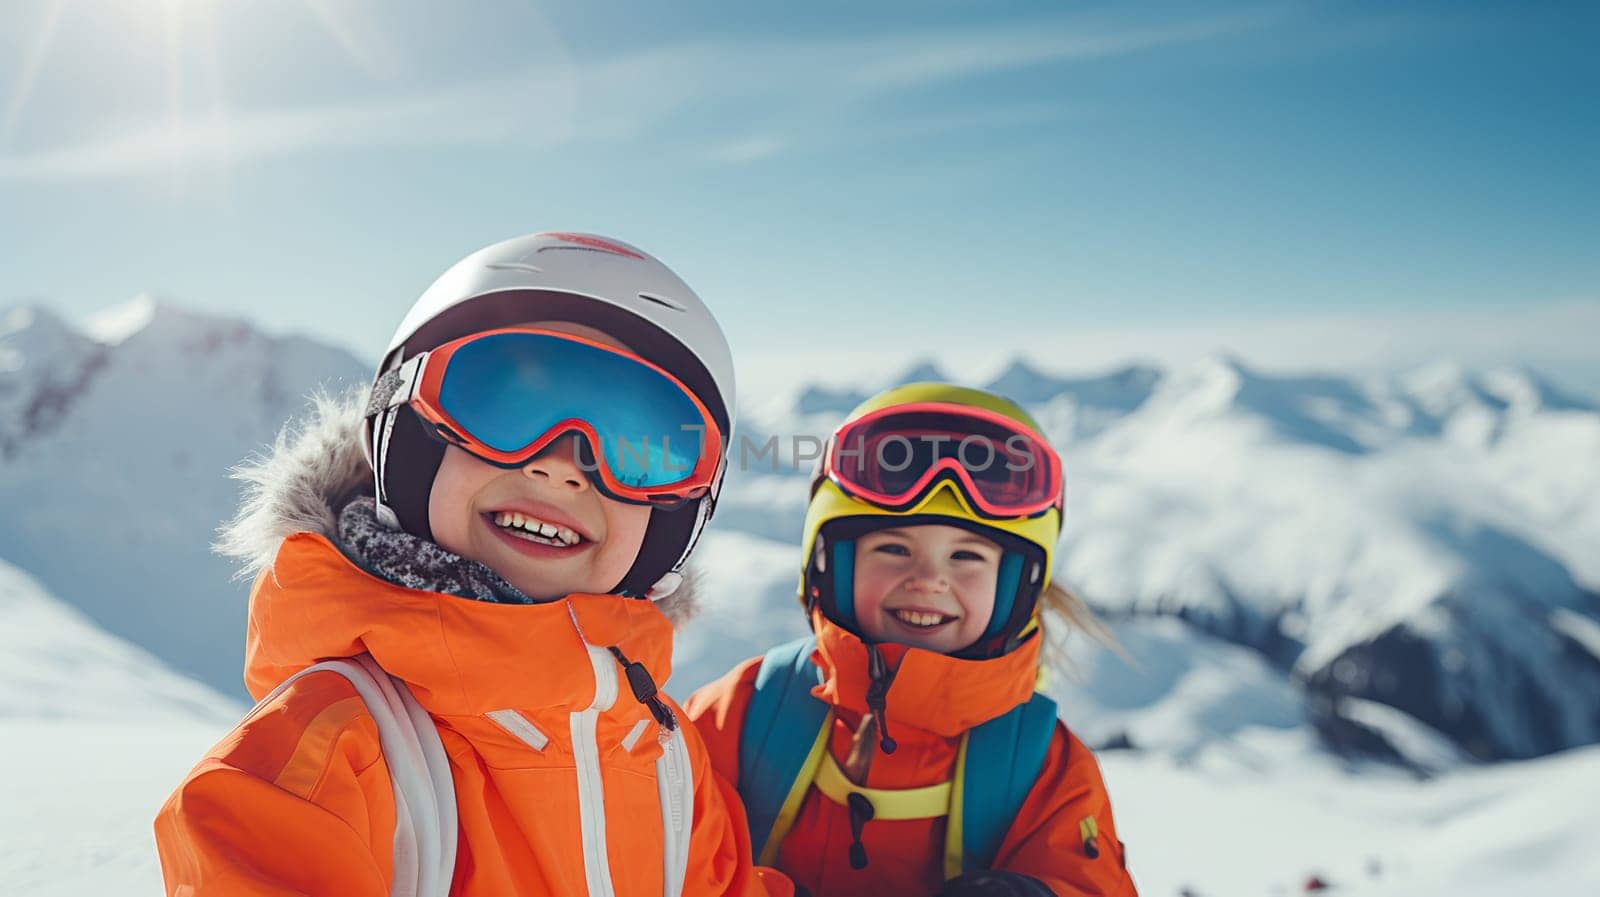 Portrait of a happy, smiling children snowboarder against the backdrop of snow-capped mountains at a ski resort, during the winter holidays. by Alla_Yurtayeva